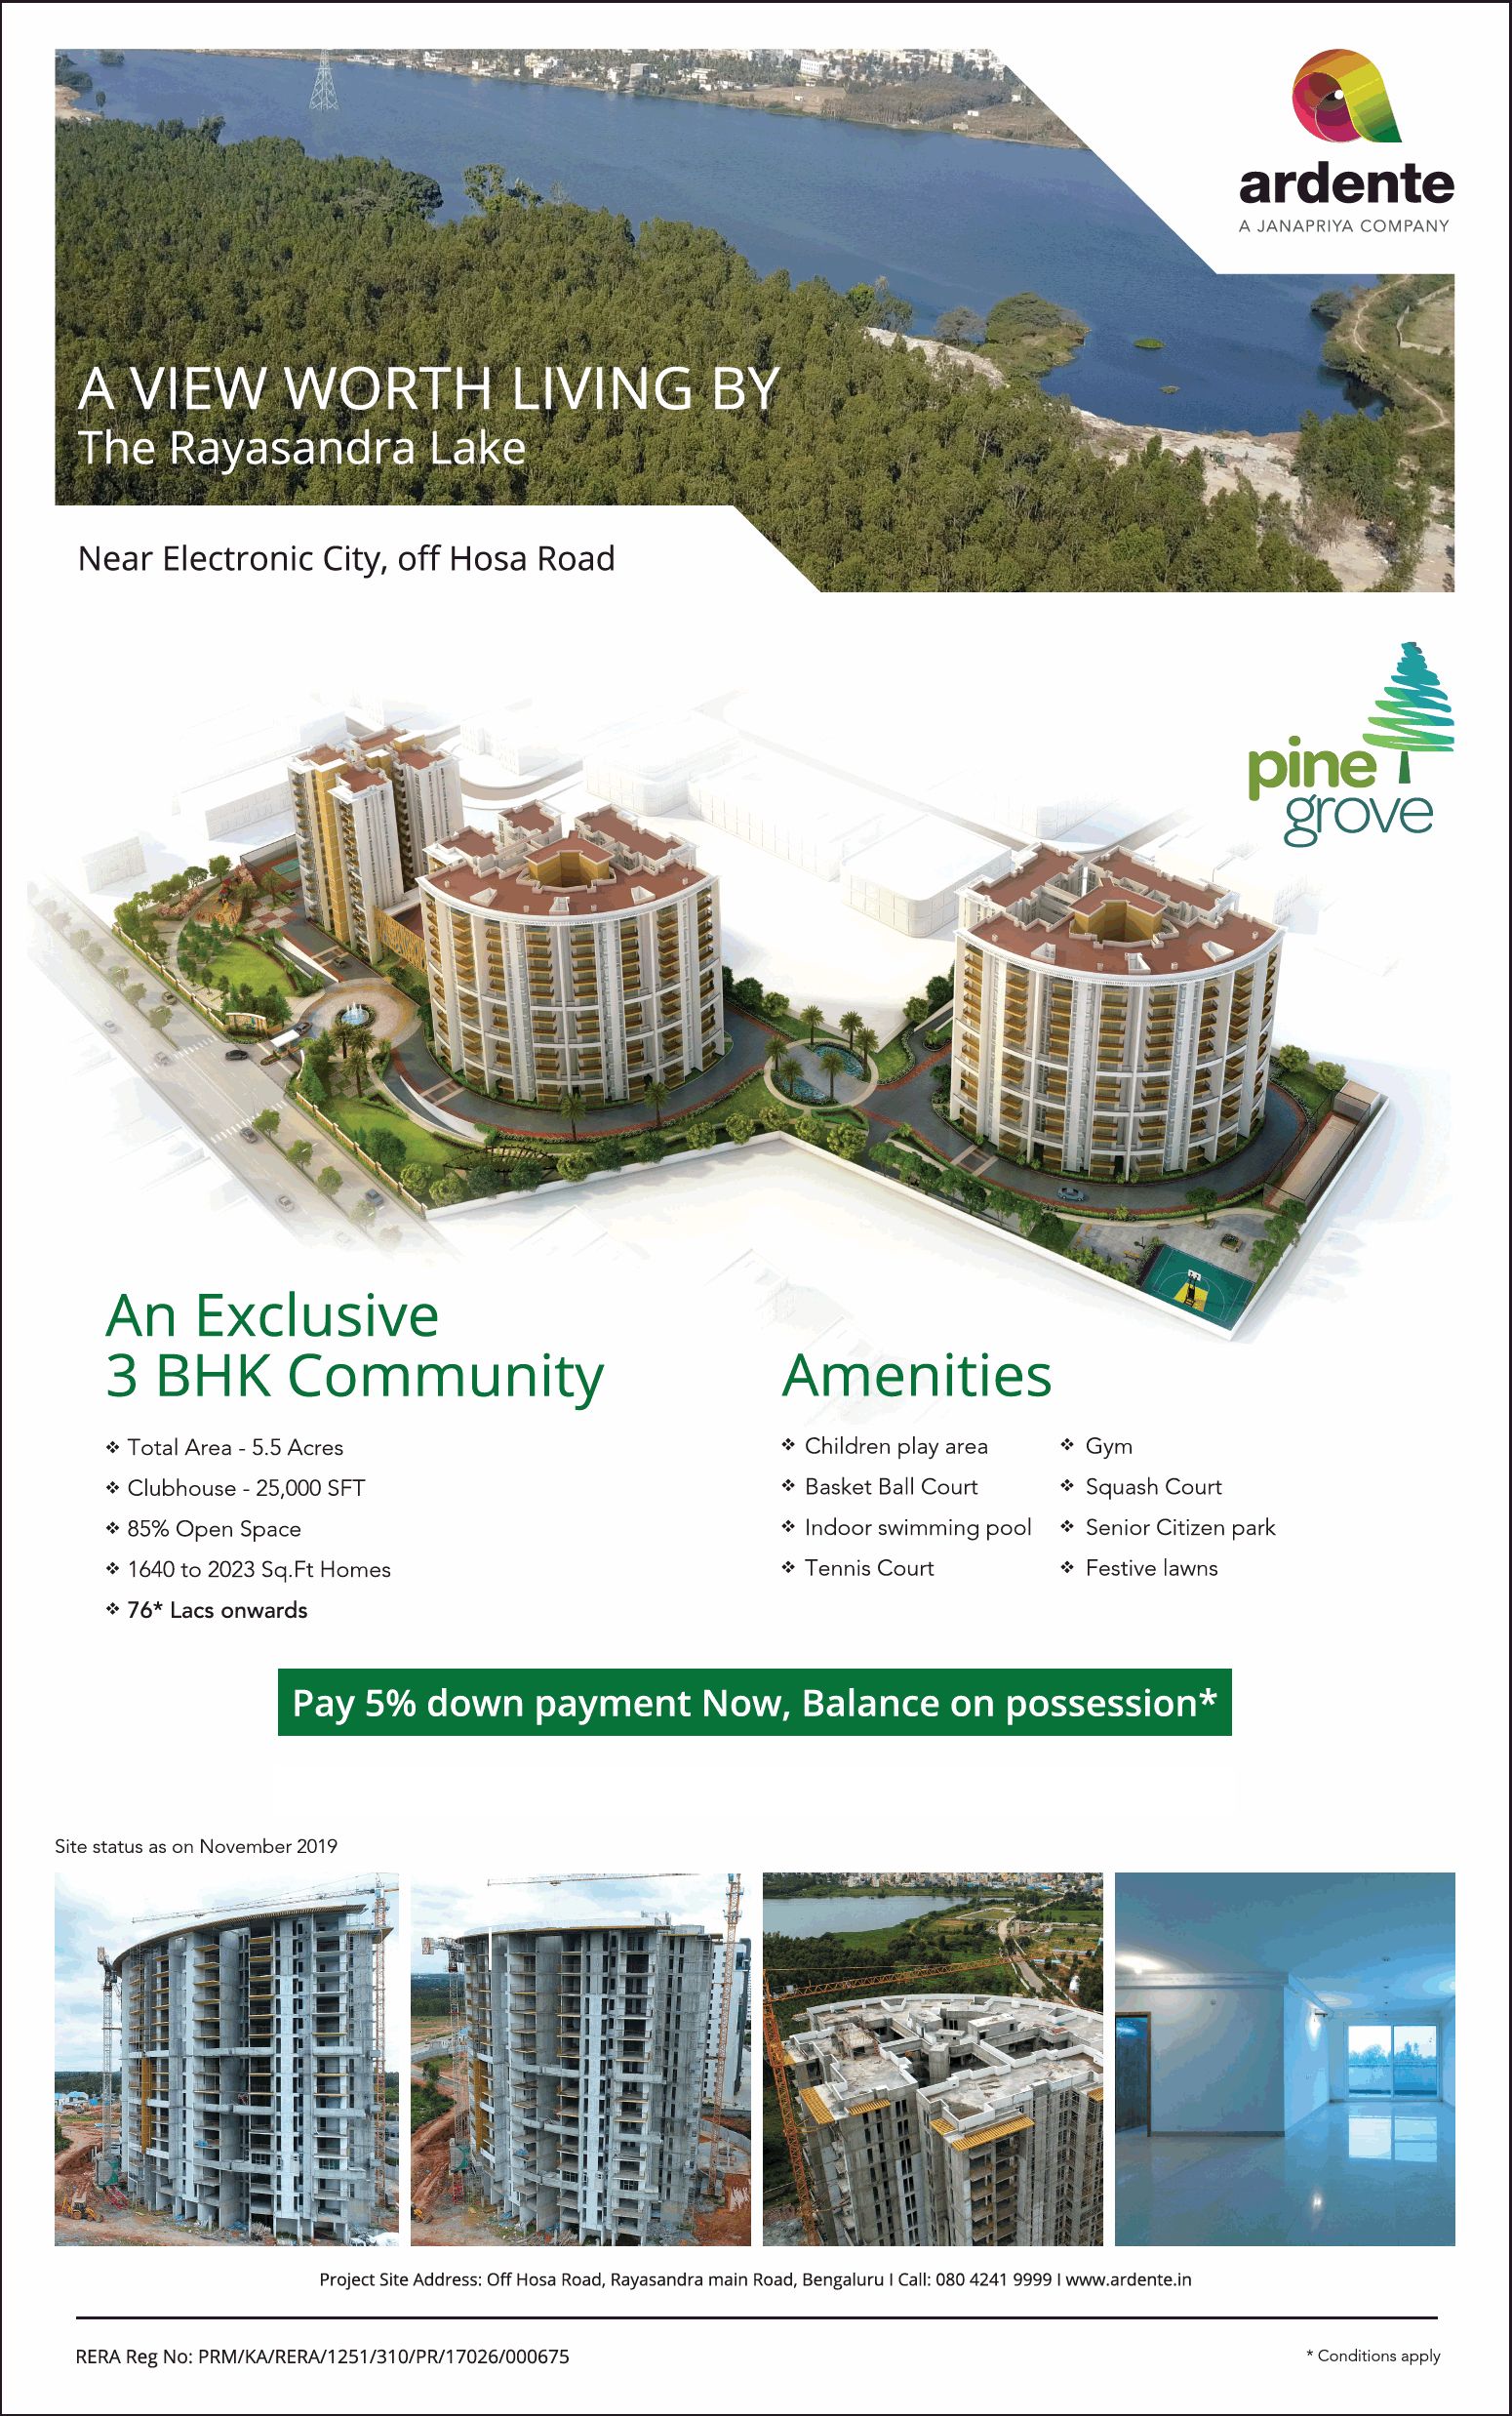 Pay 5% down payment now, balance on possession at Ardente Pine Grove, Bangalore Update